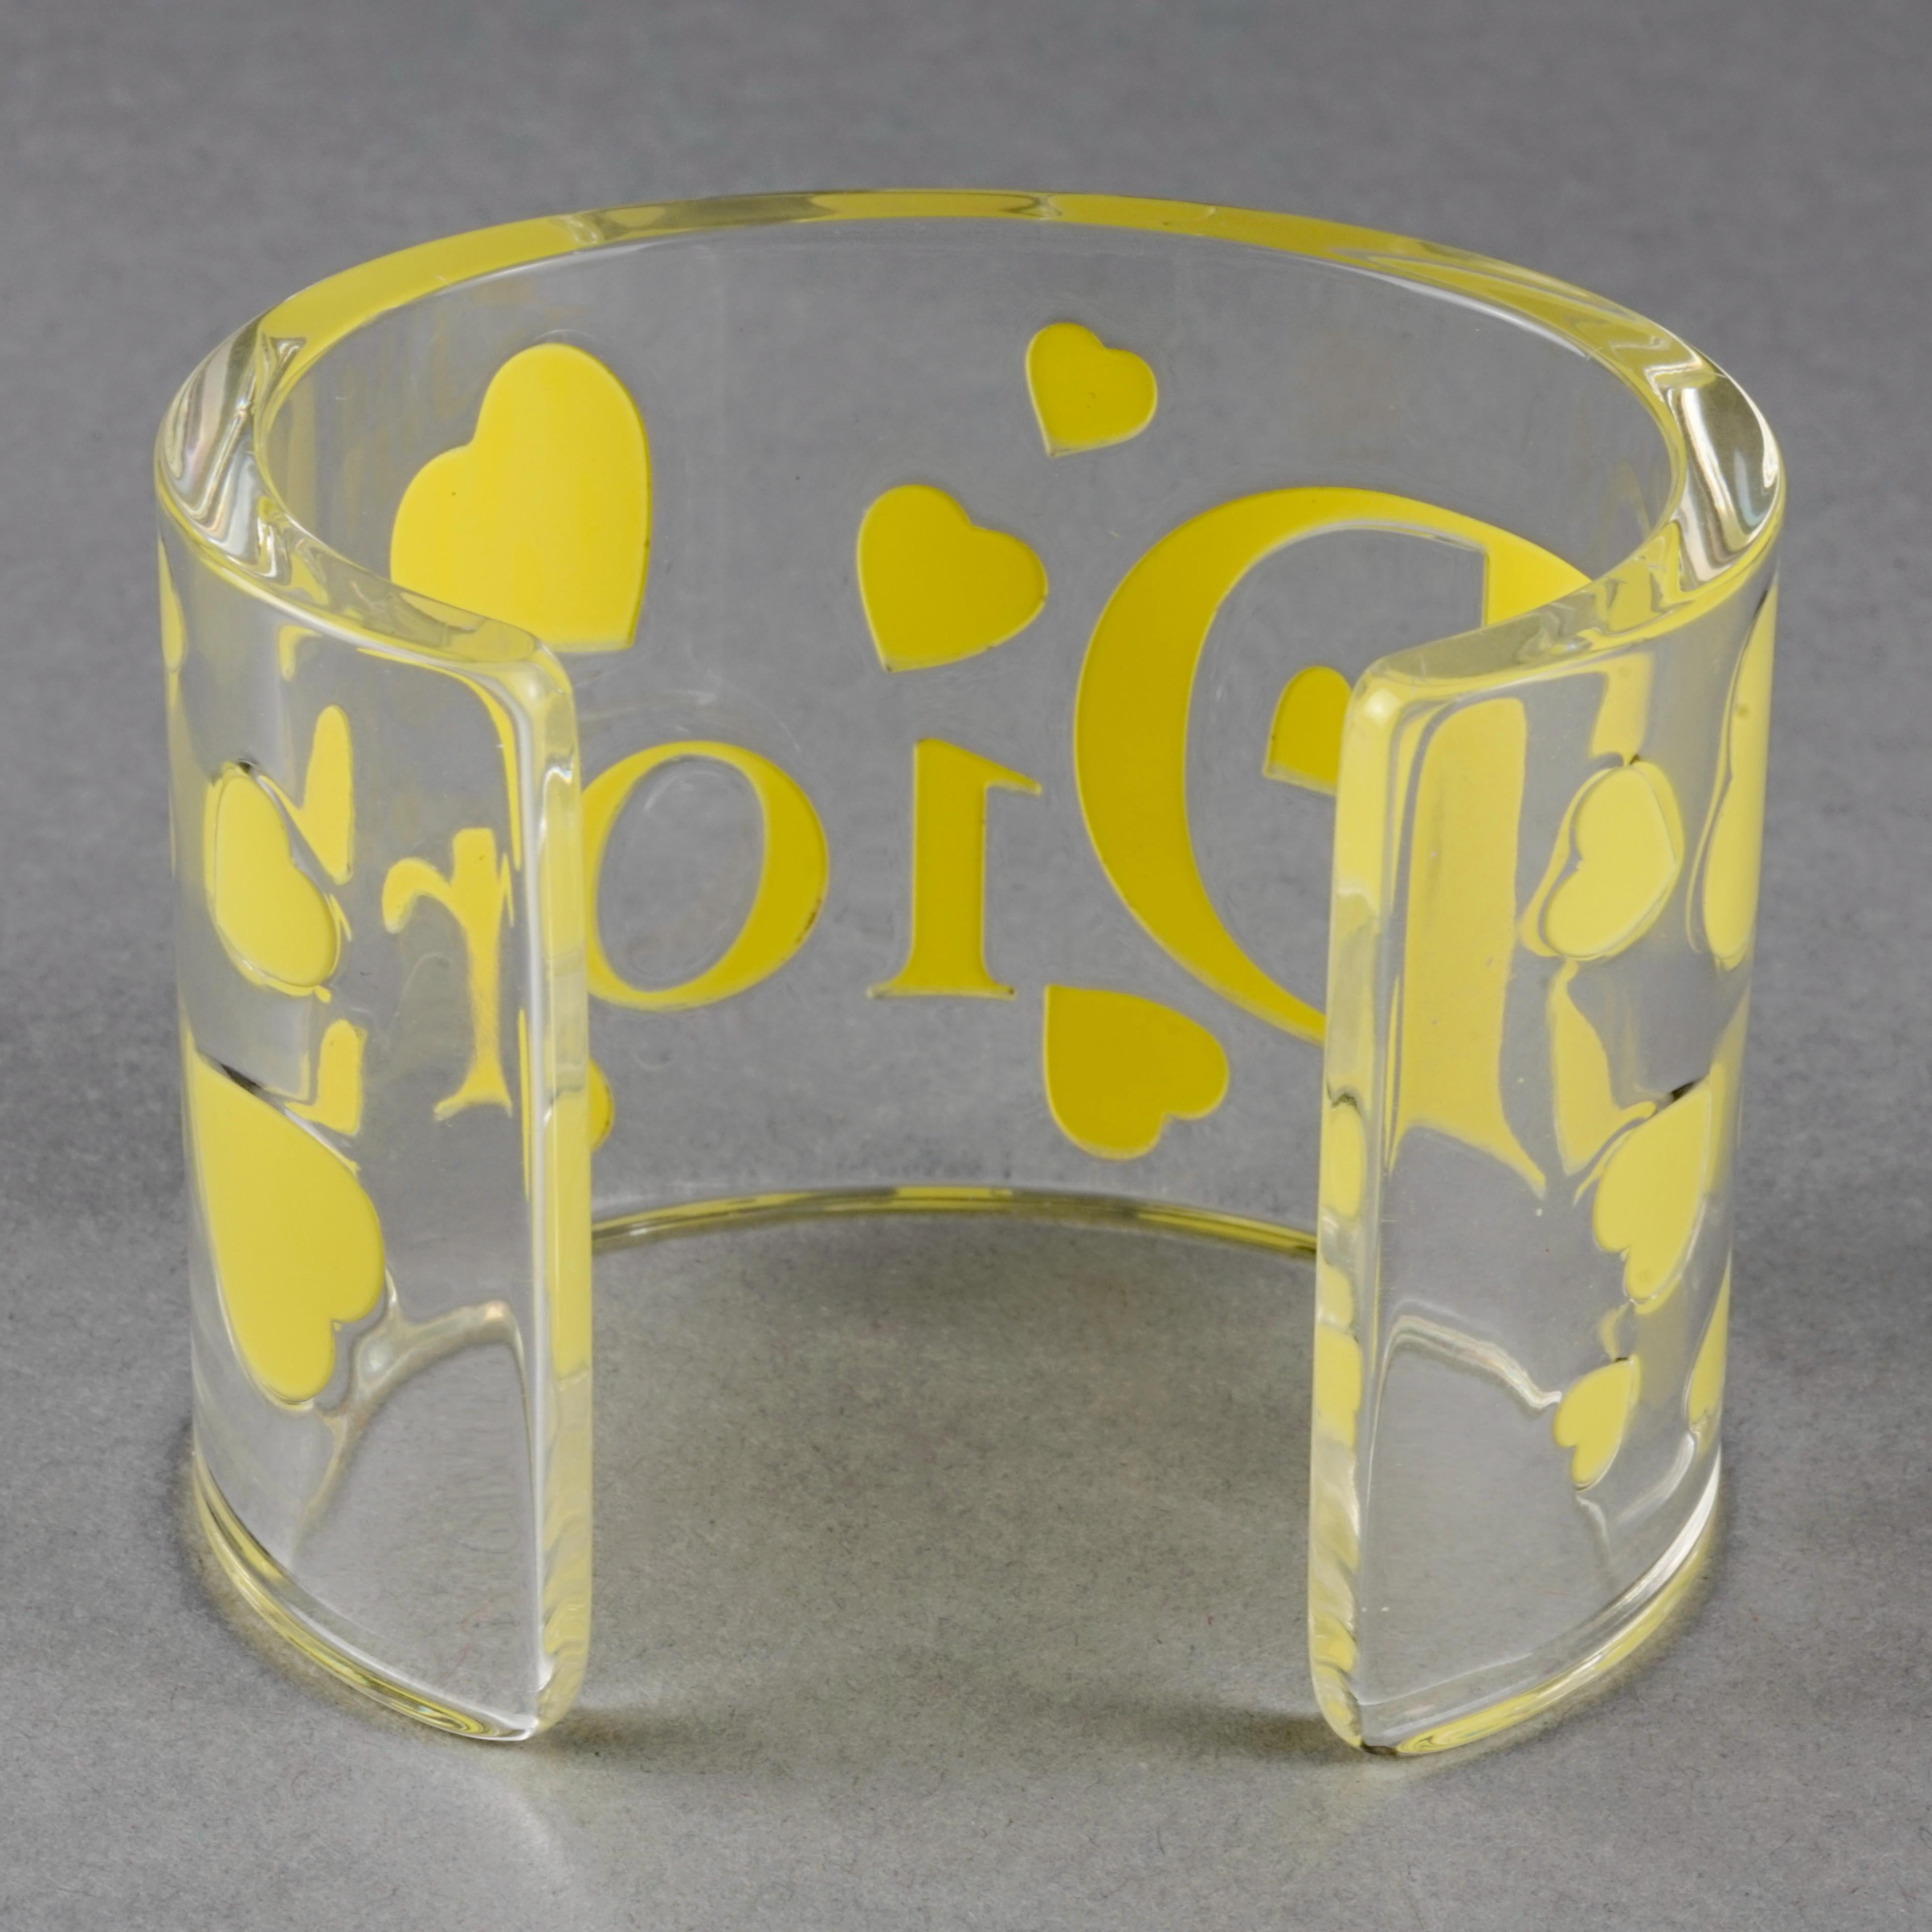 Vintage CHRISTIAN DIOR Yellow Heart Lucite Cuff Bracelet For Sale 2